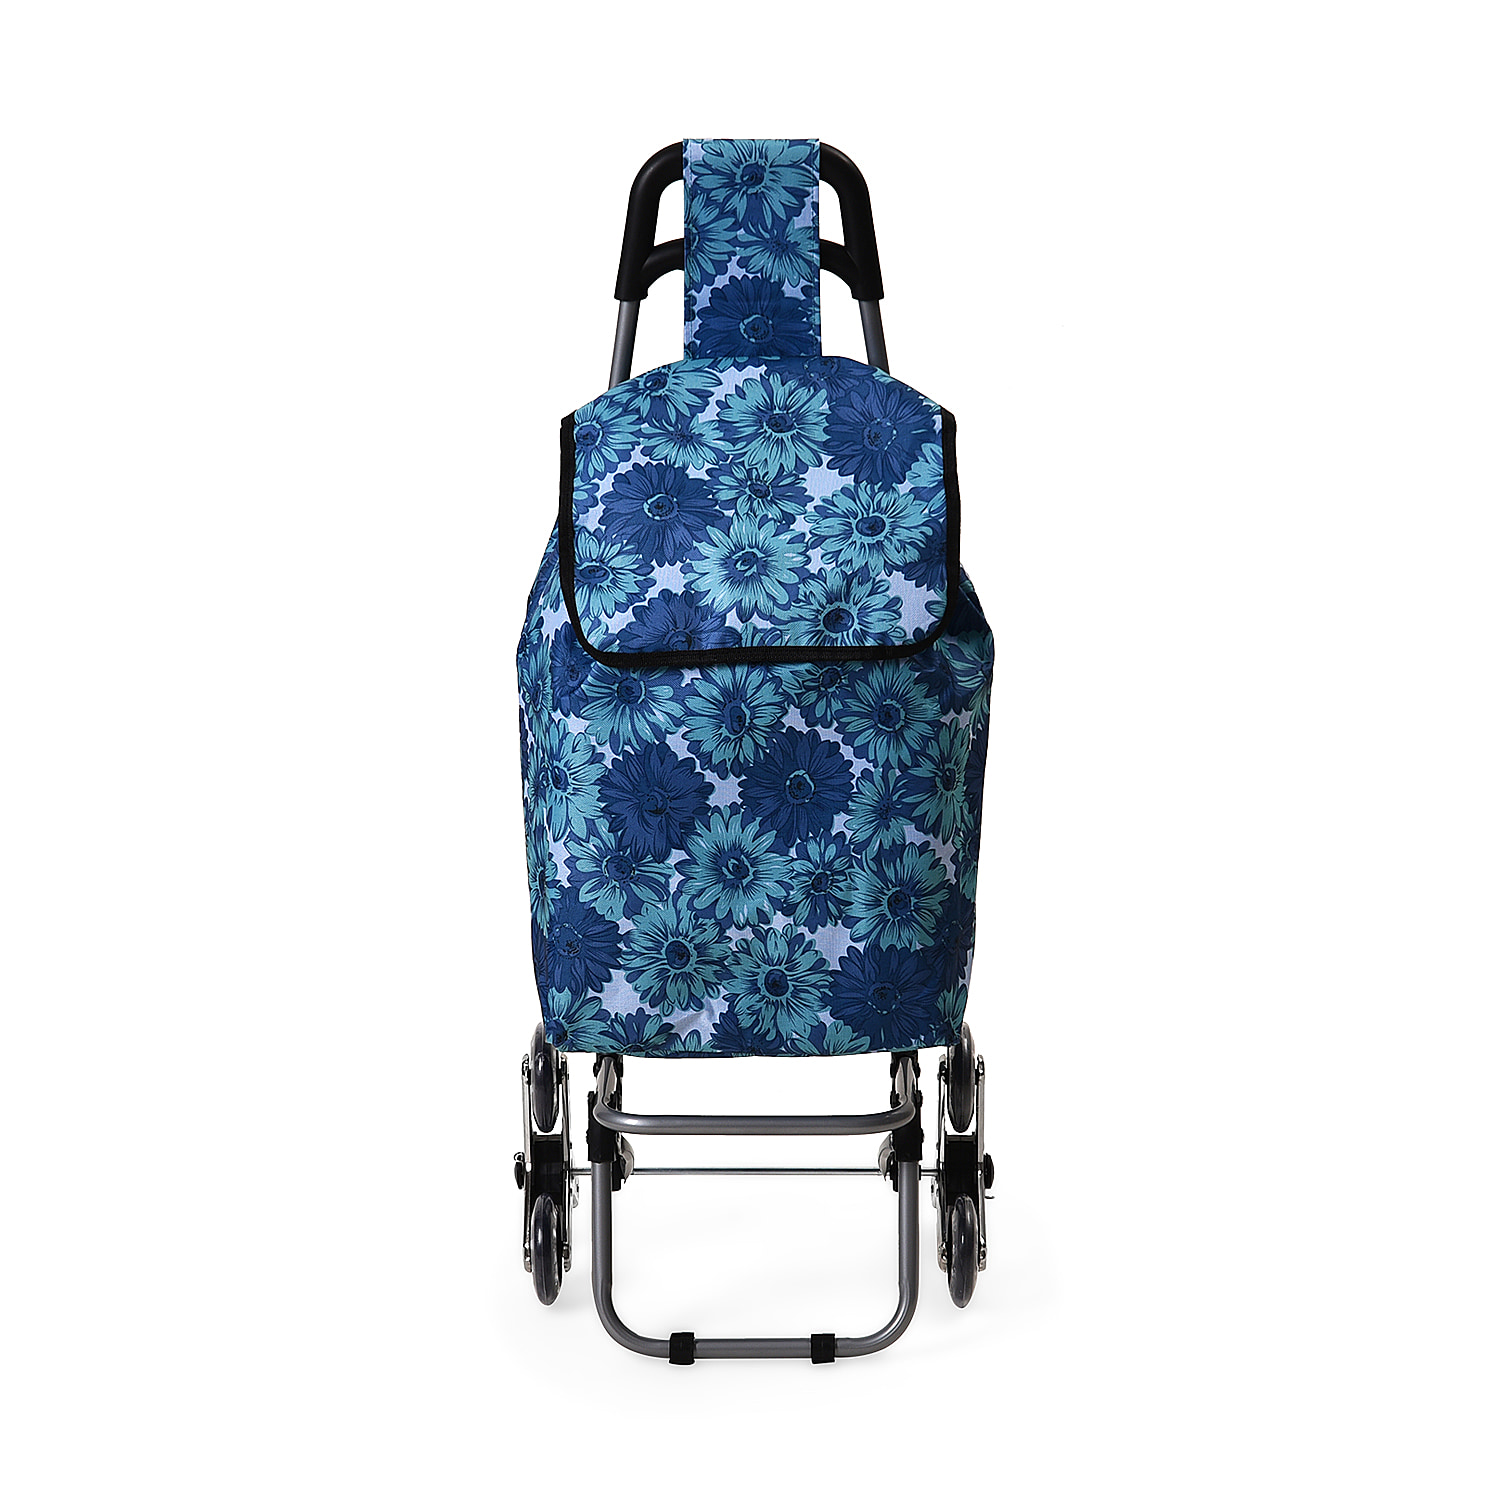 Oxford-Cloth-Patterned-Shopping-Trolley-Size-92x38x28-cm-Blue-Blue